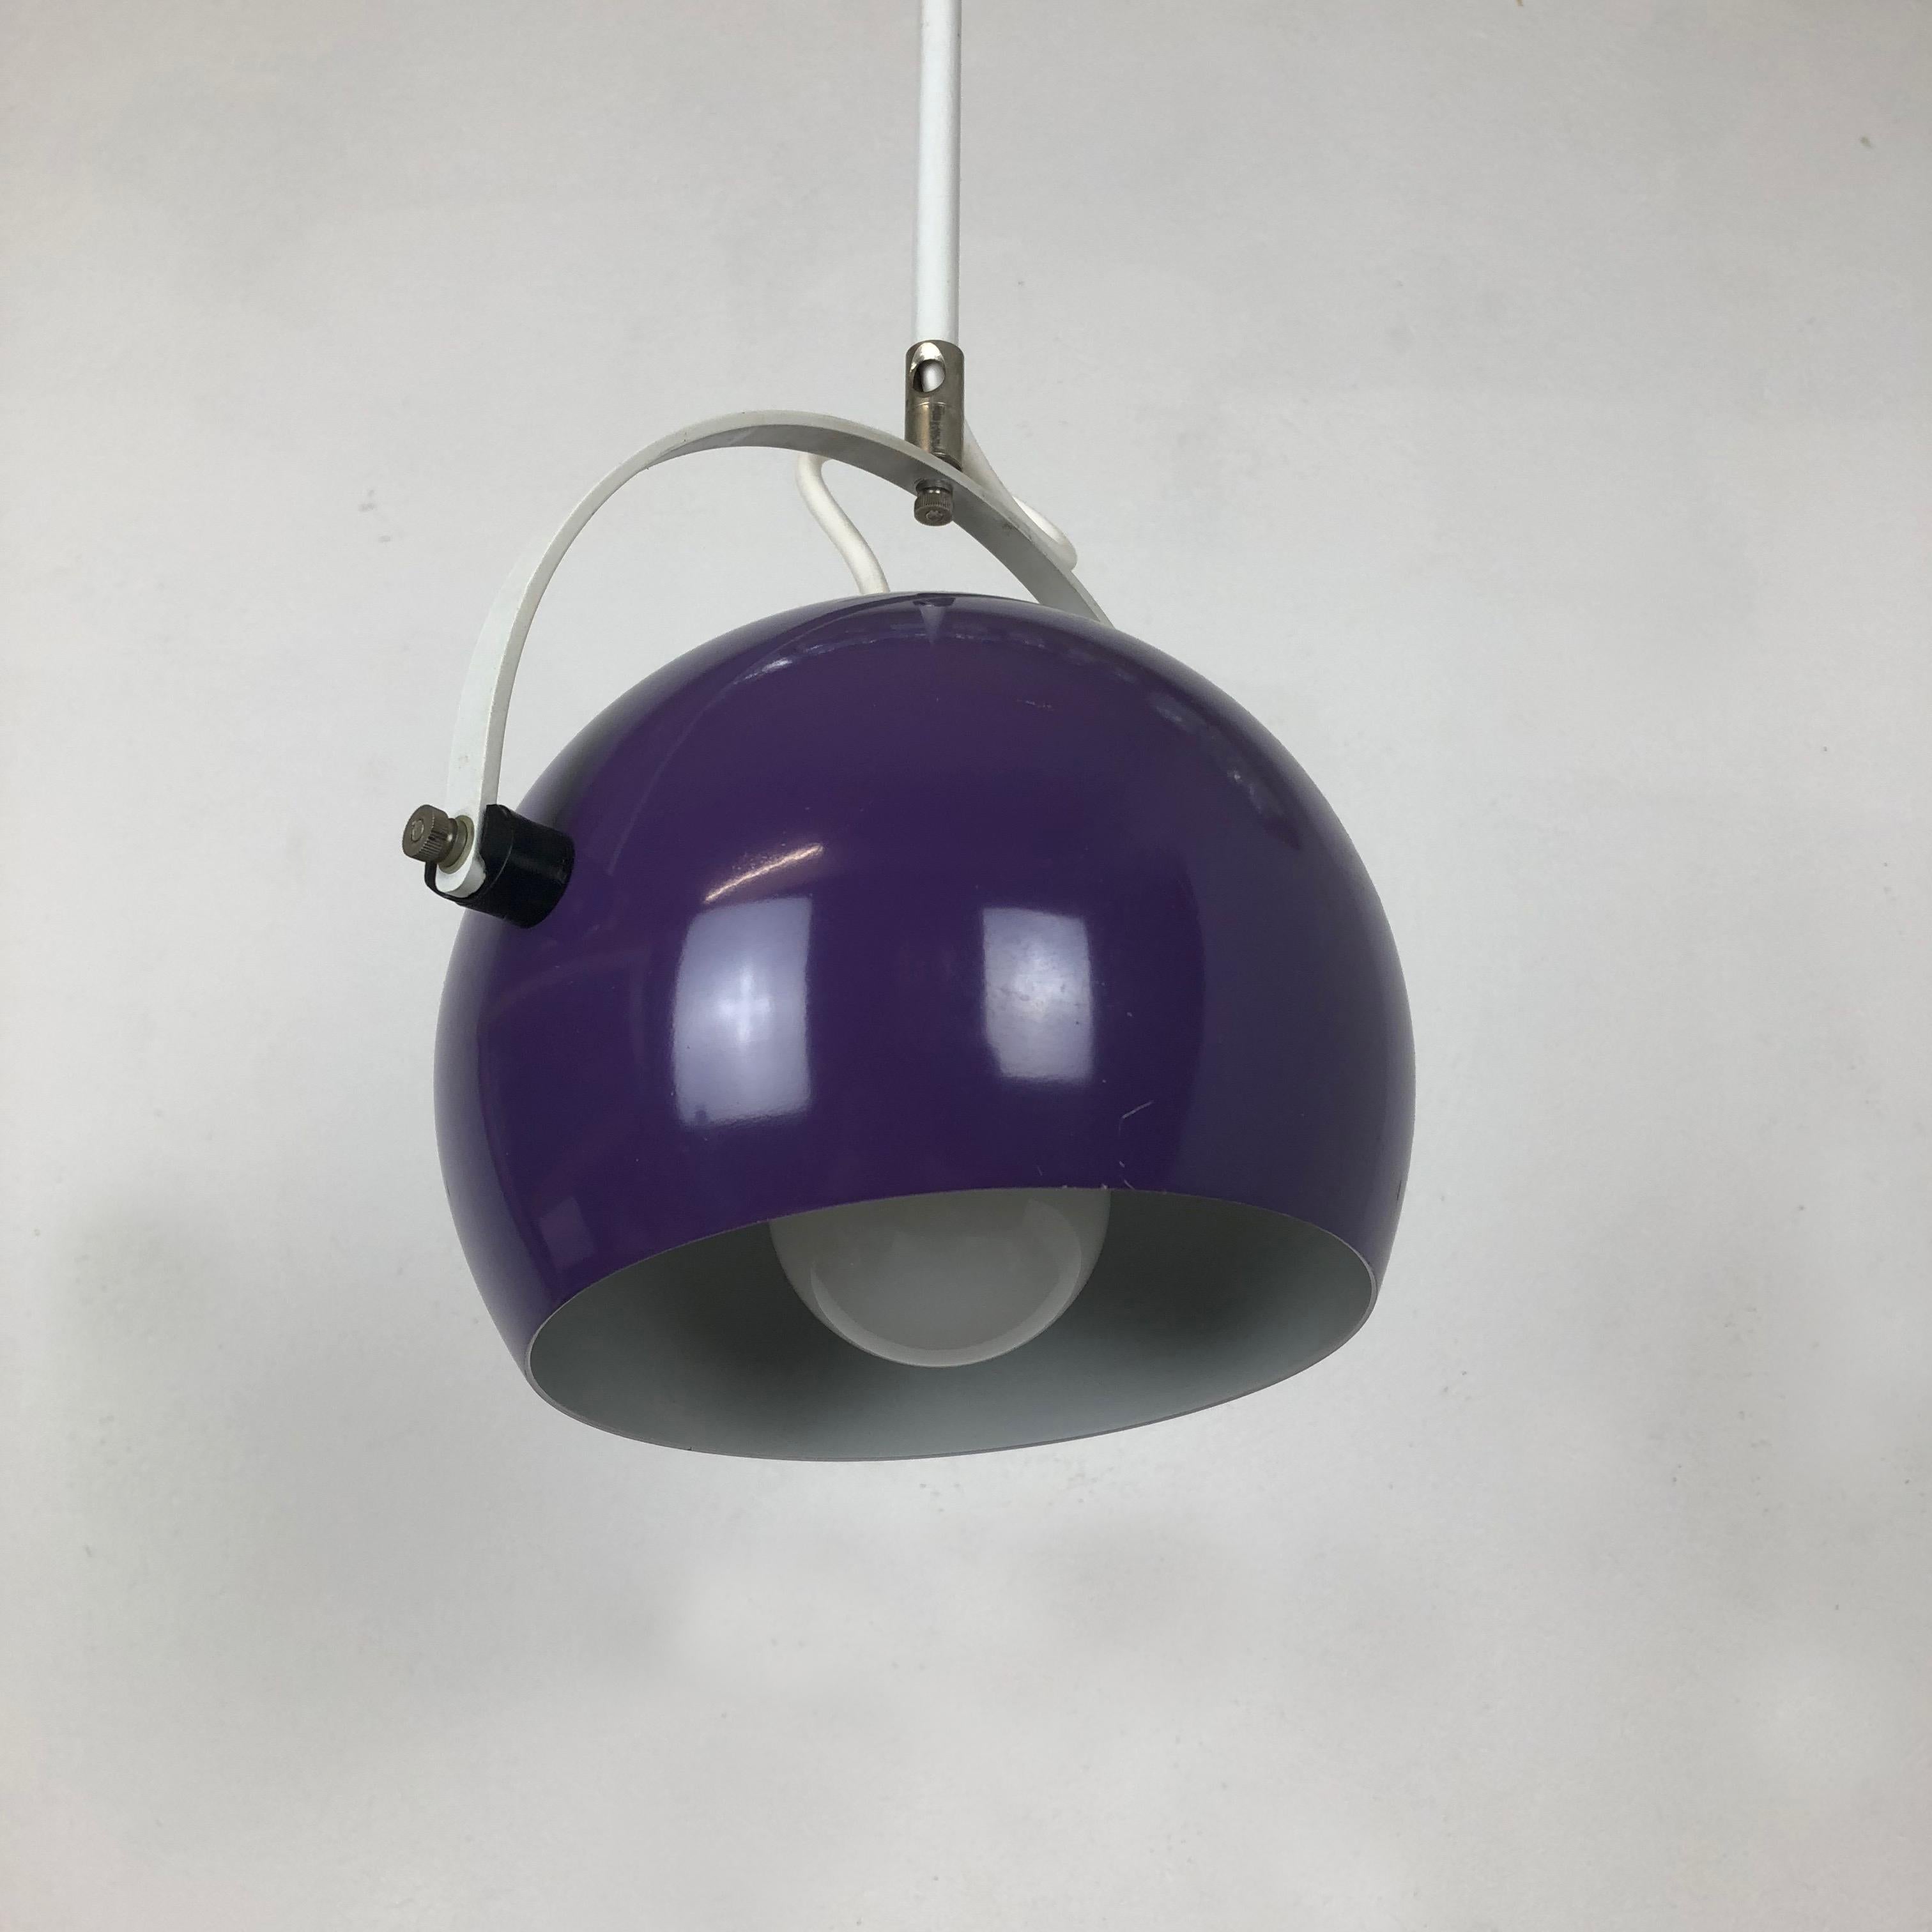 Adjustable Pop Art Panton Style Hanging Light with Purple Spot, Germany, 1970s For Sale 2